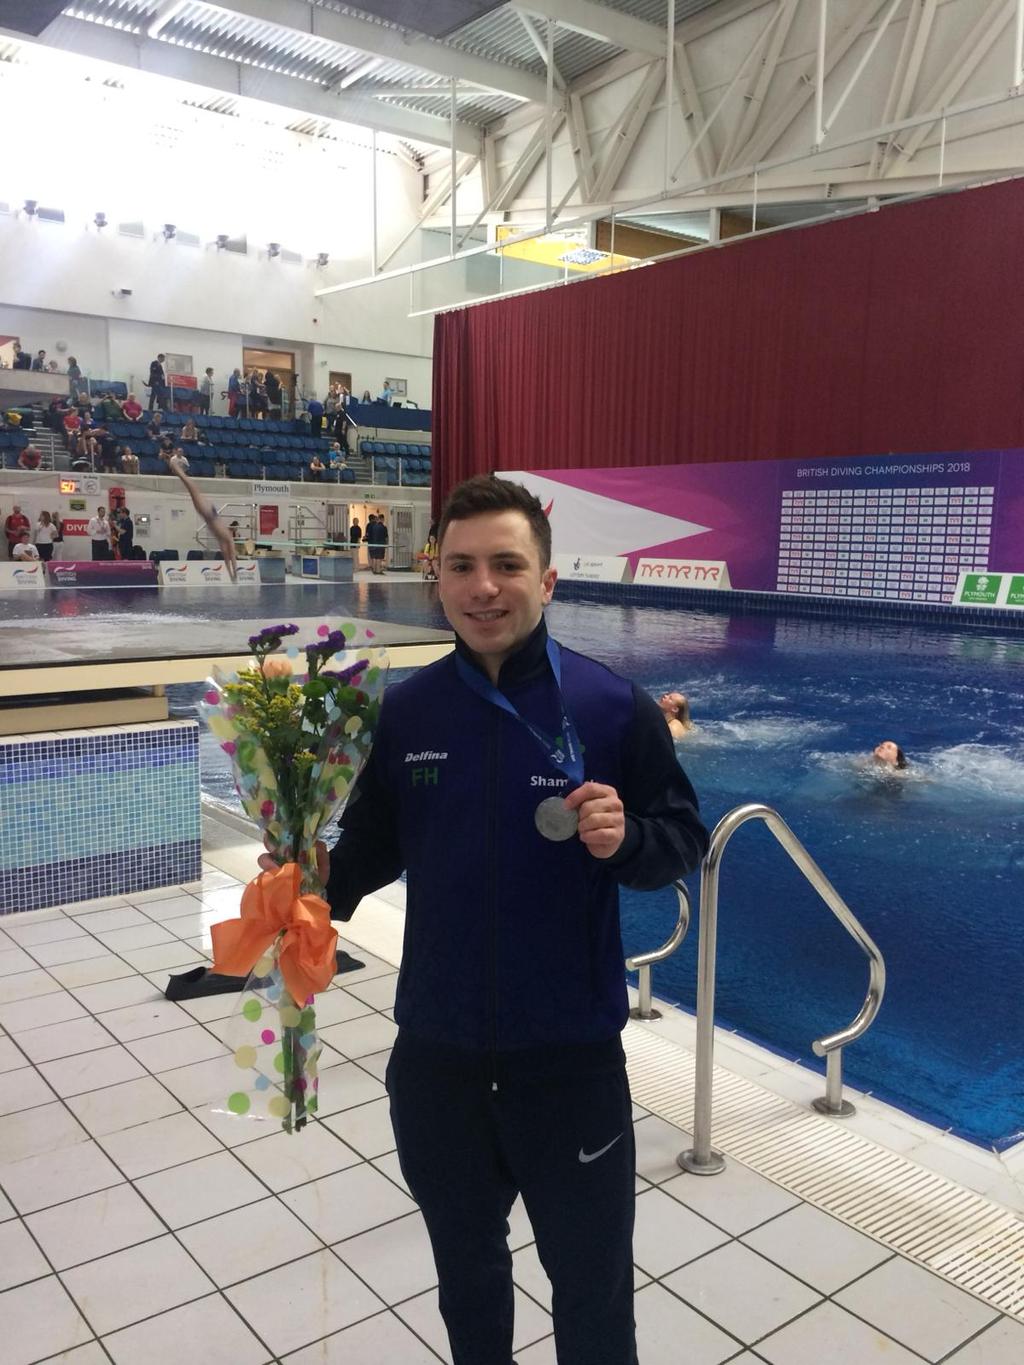 Championships. Oliver Dingley was crowned CHAMPION in Men s 3m scoring 447.